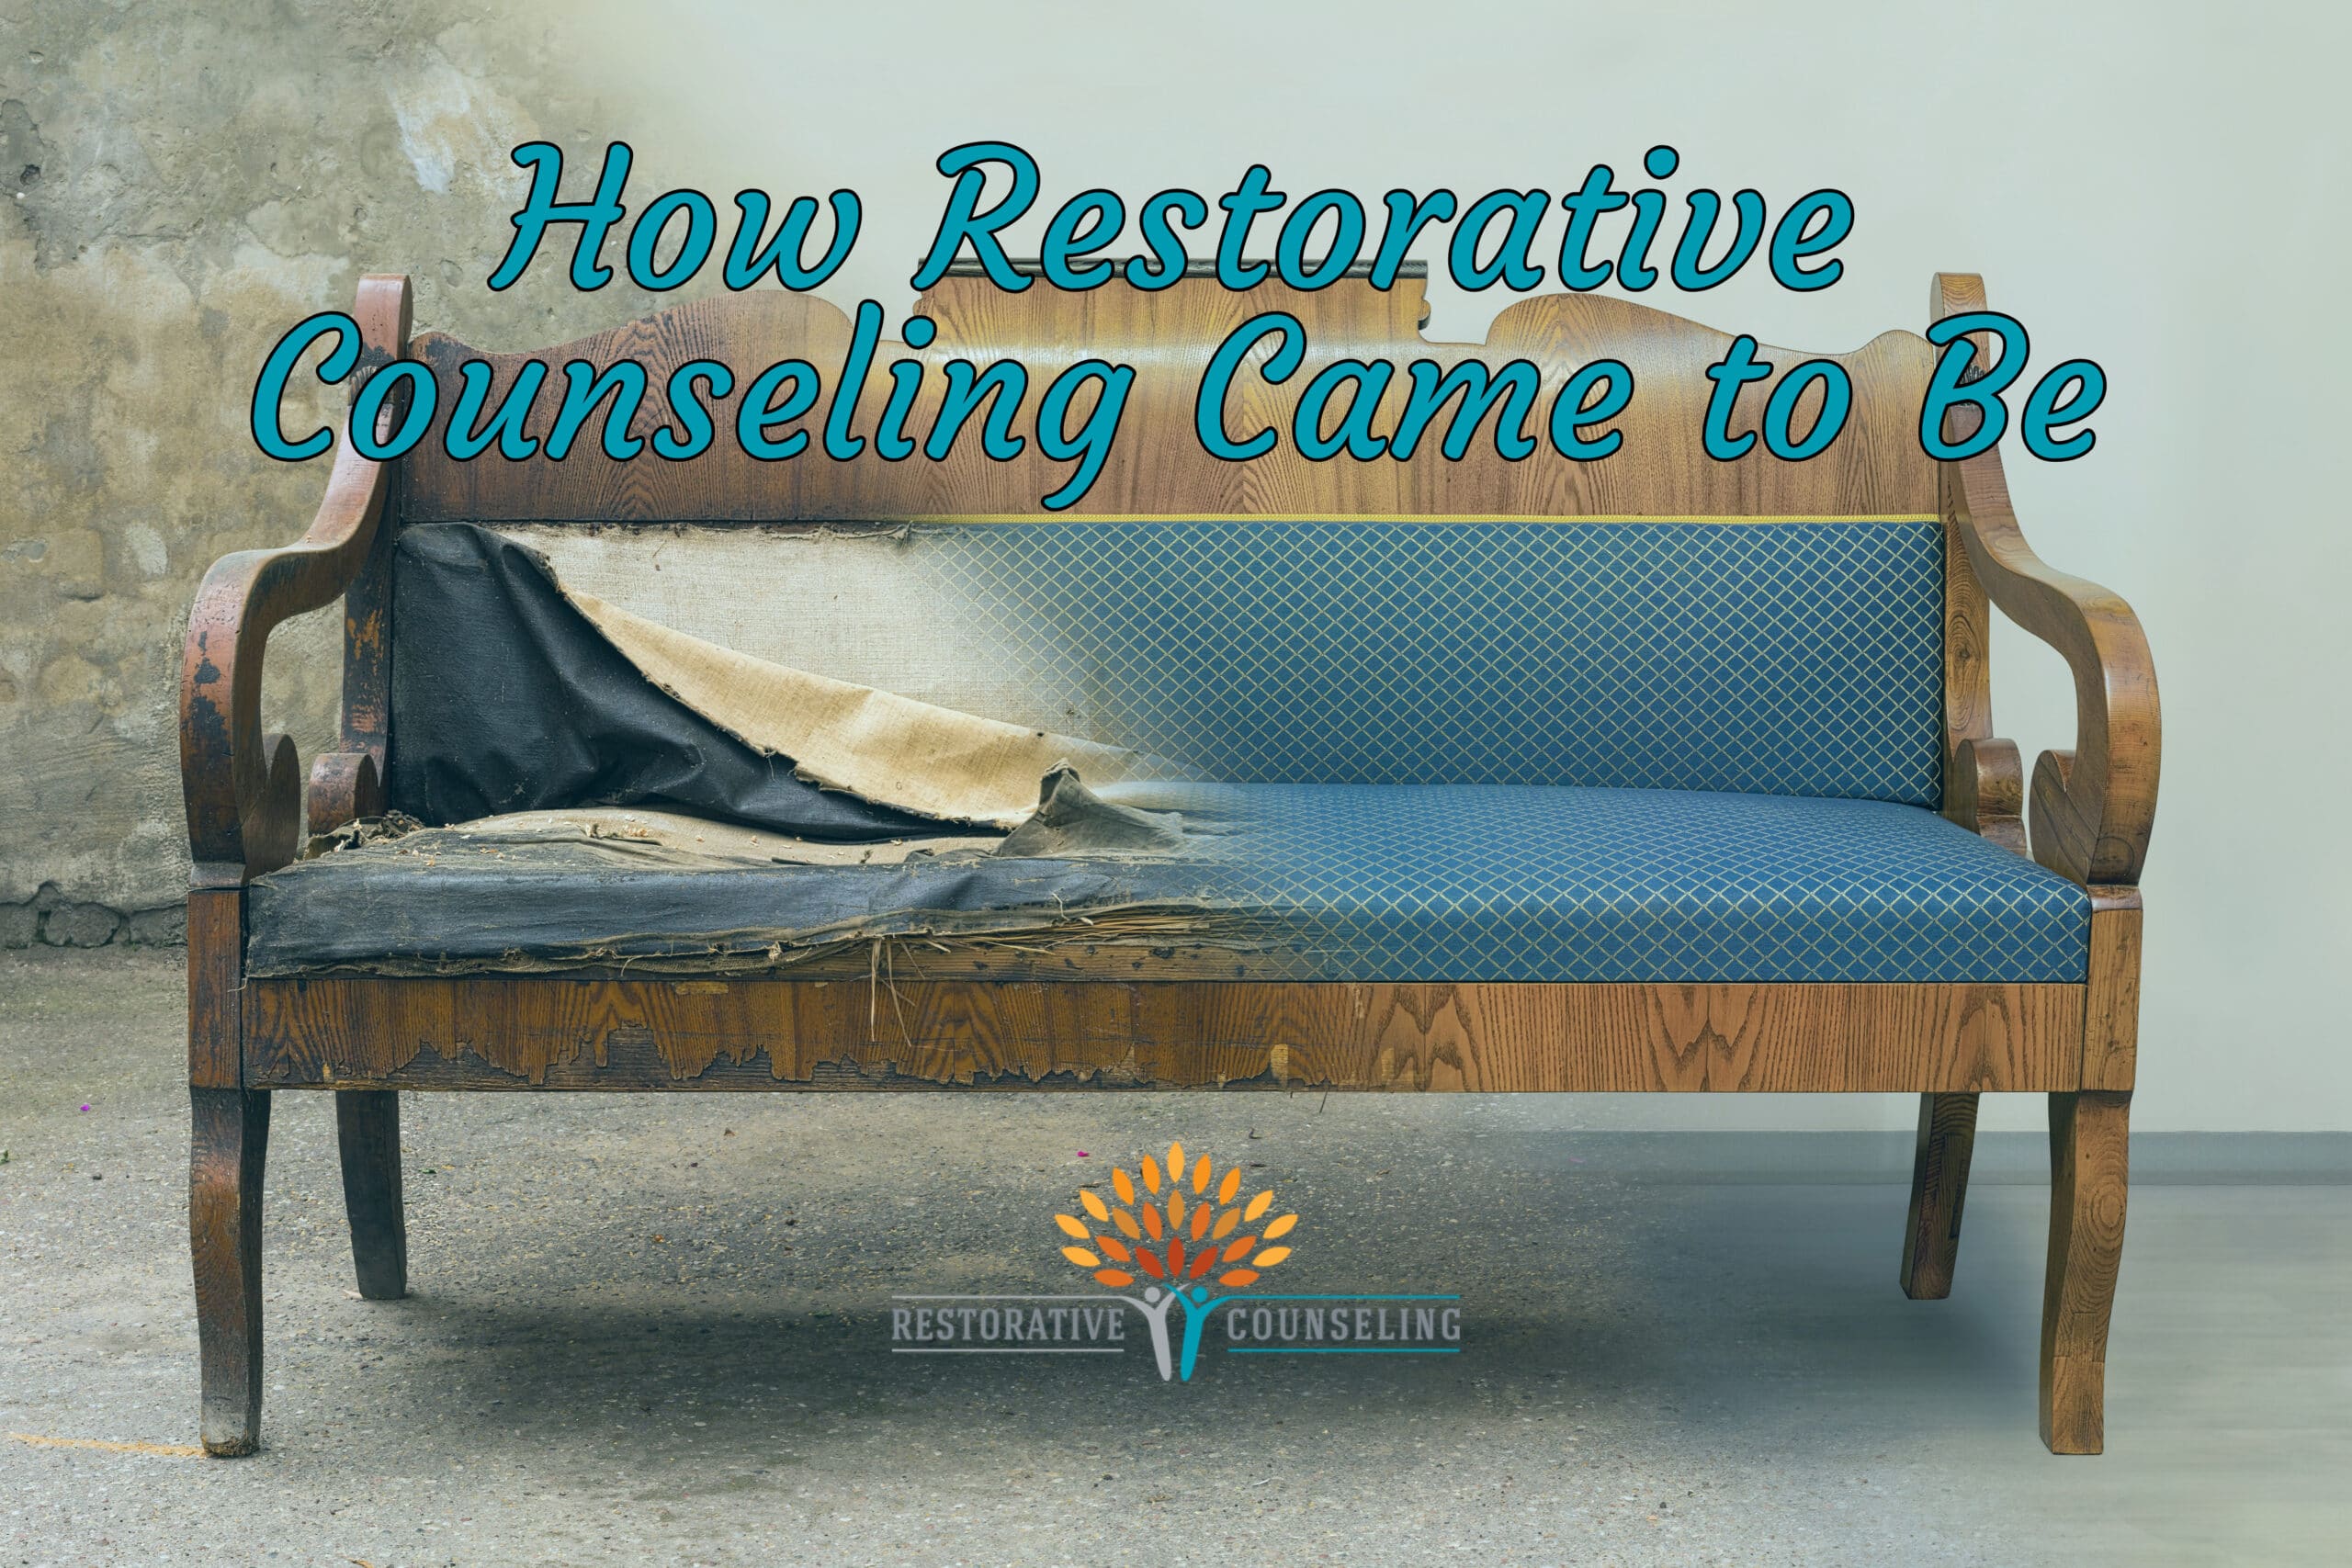 How Restorative Counseling Came to Be